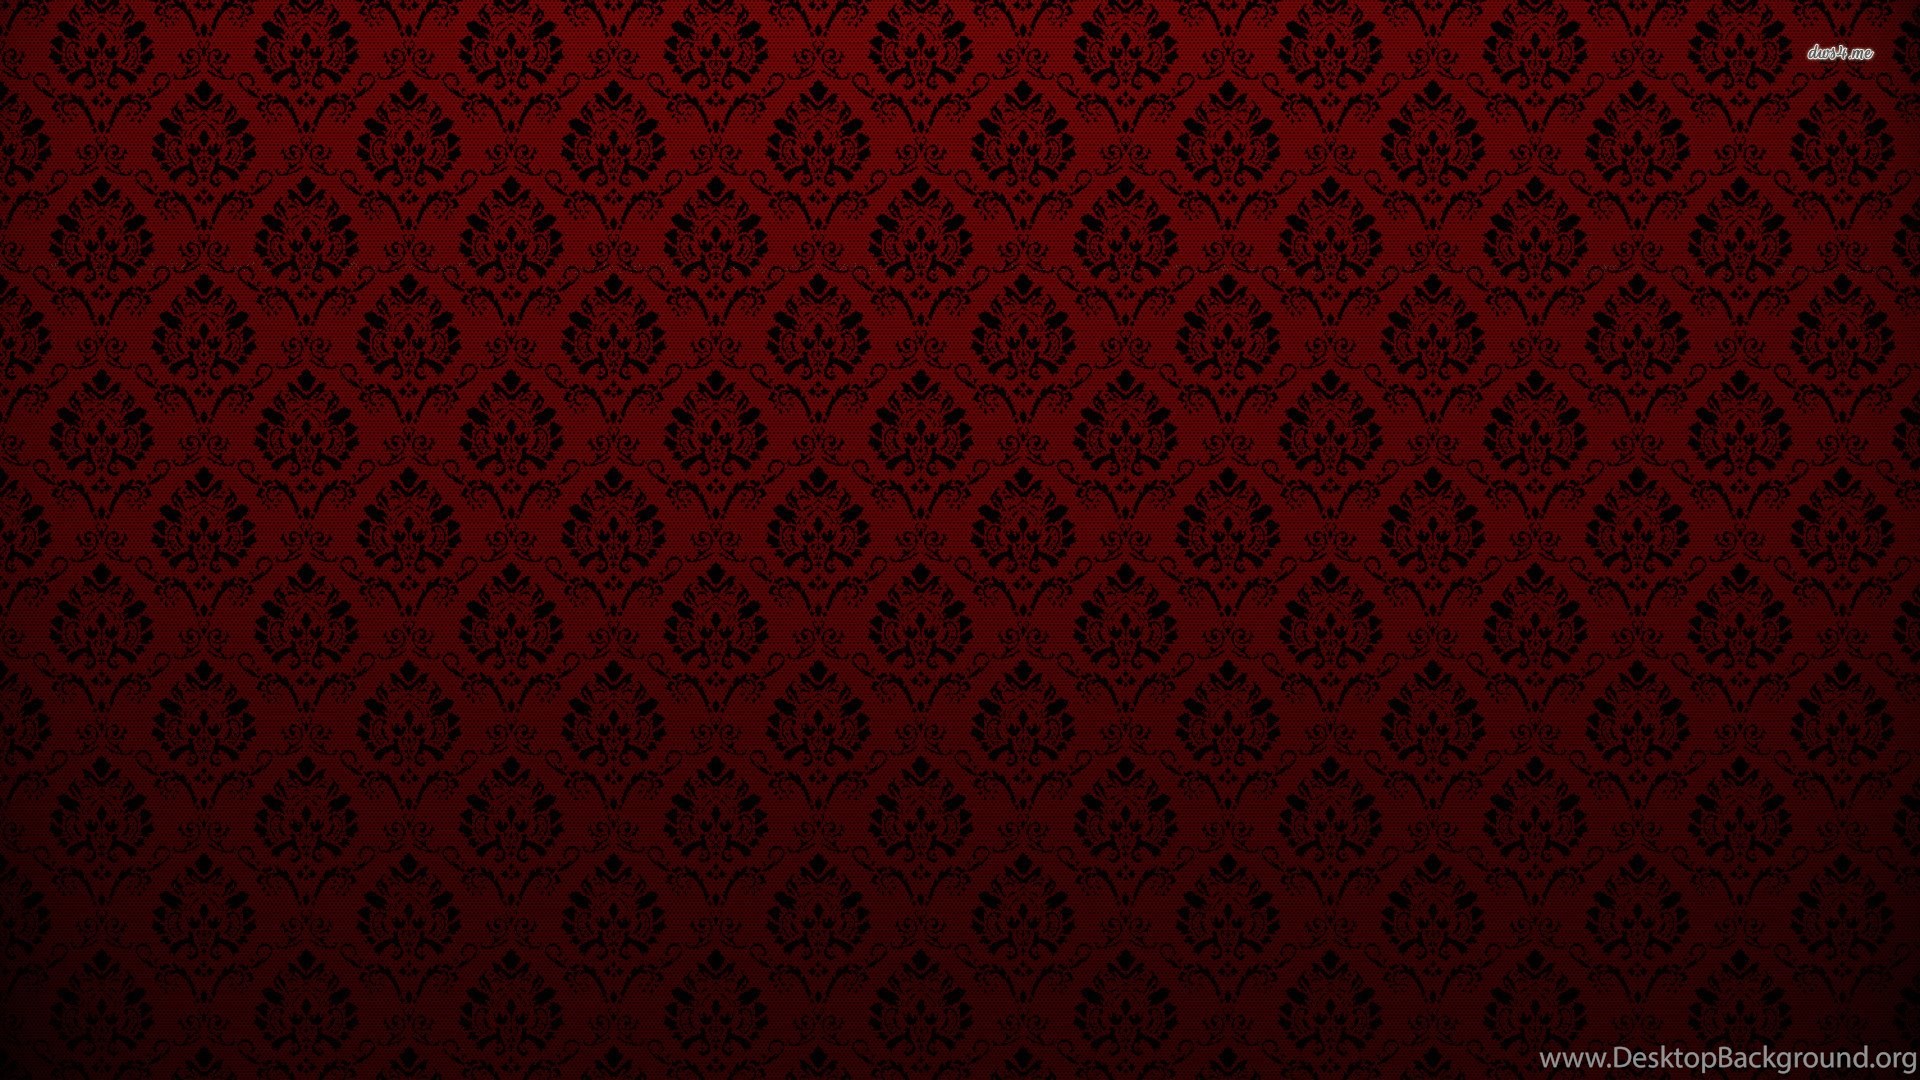 Gothic Pattern Wallpapers For Android On Wallpaper - Red And Black Gothic -  1920x1080 Wallpaper 